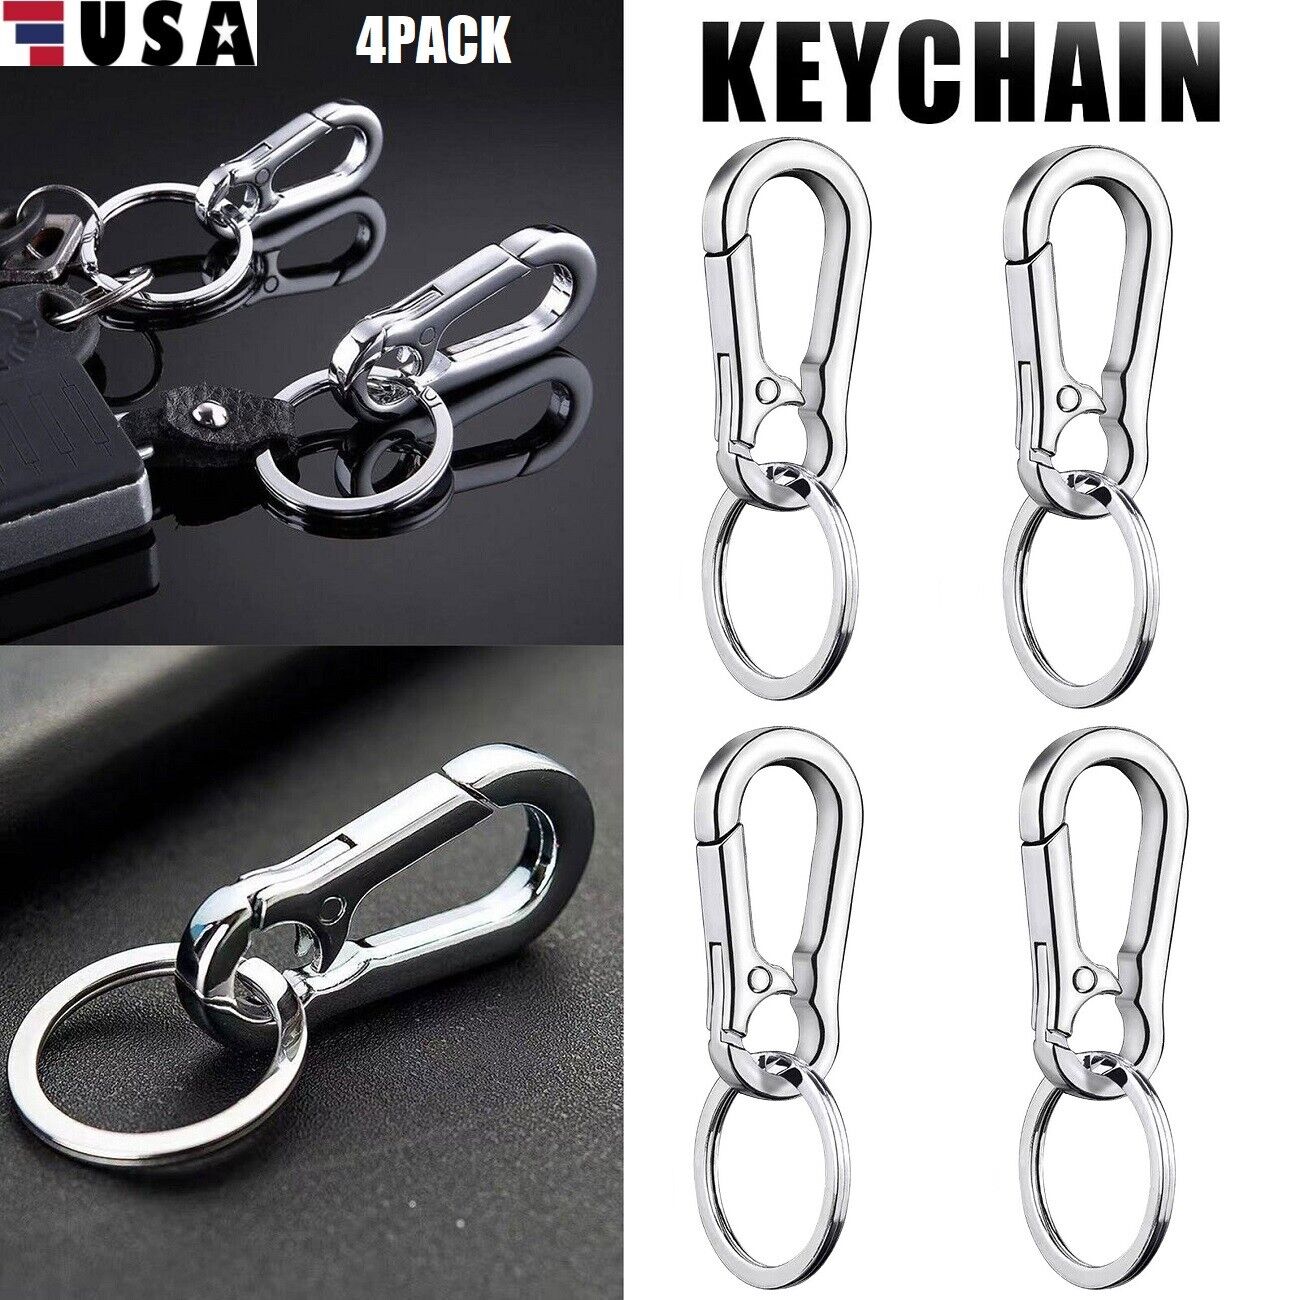 4Pcs Mini Stainless Steel Carabiner Key Chain Clip Hook Buckle Keychain Key Ring